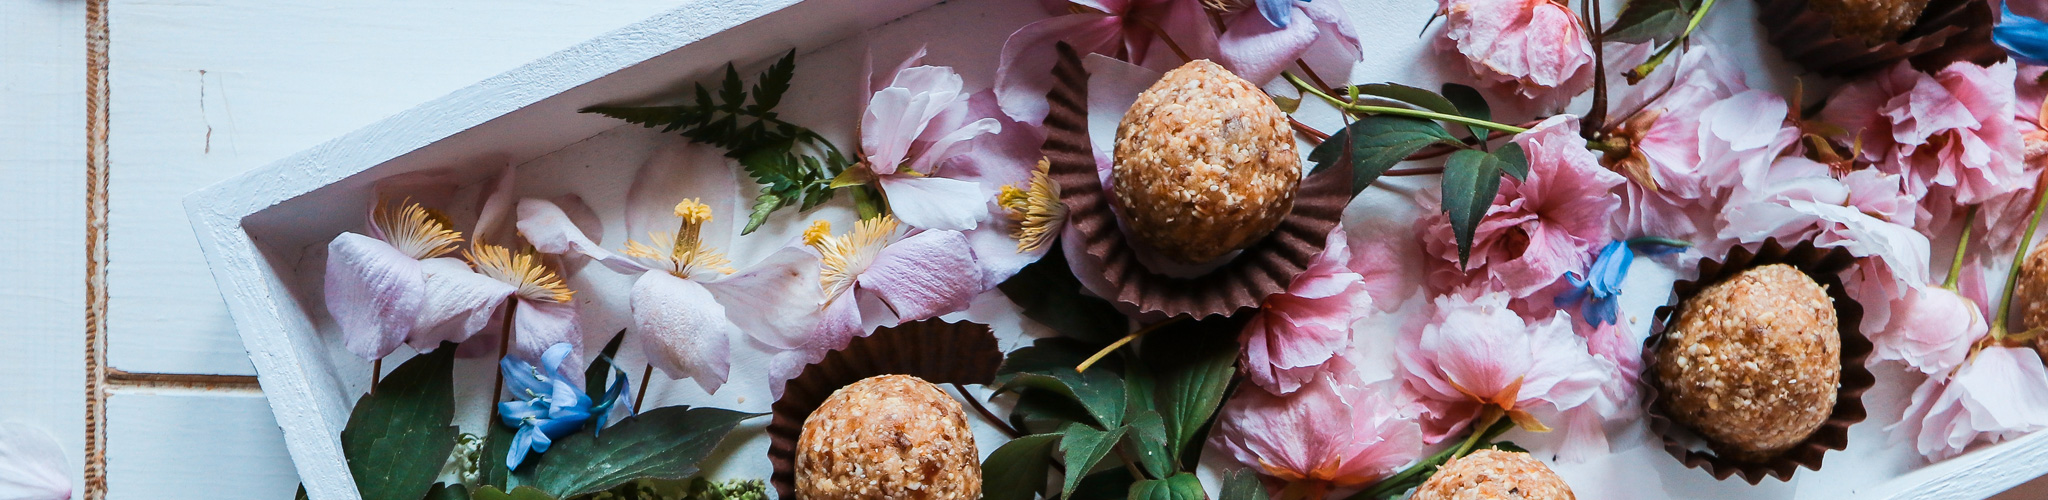 Photo of Flowers and Pastries